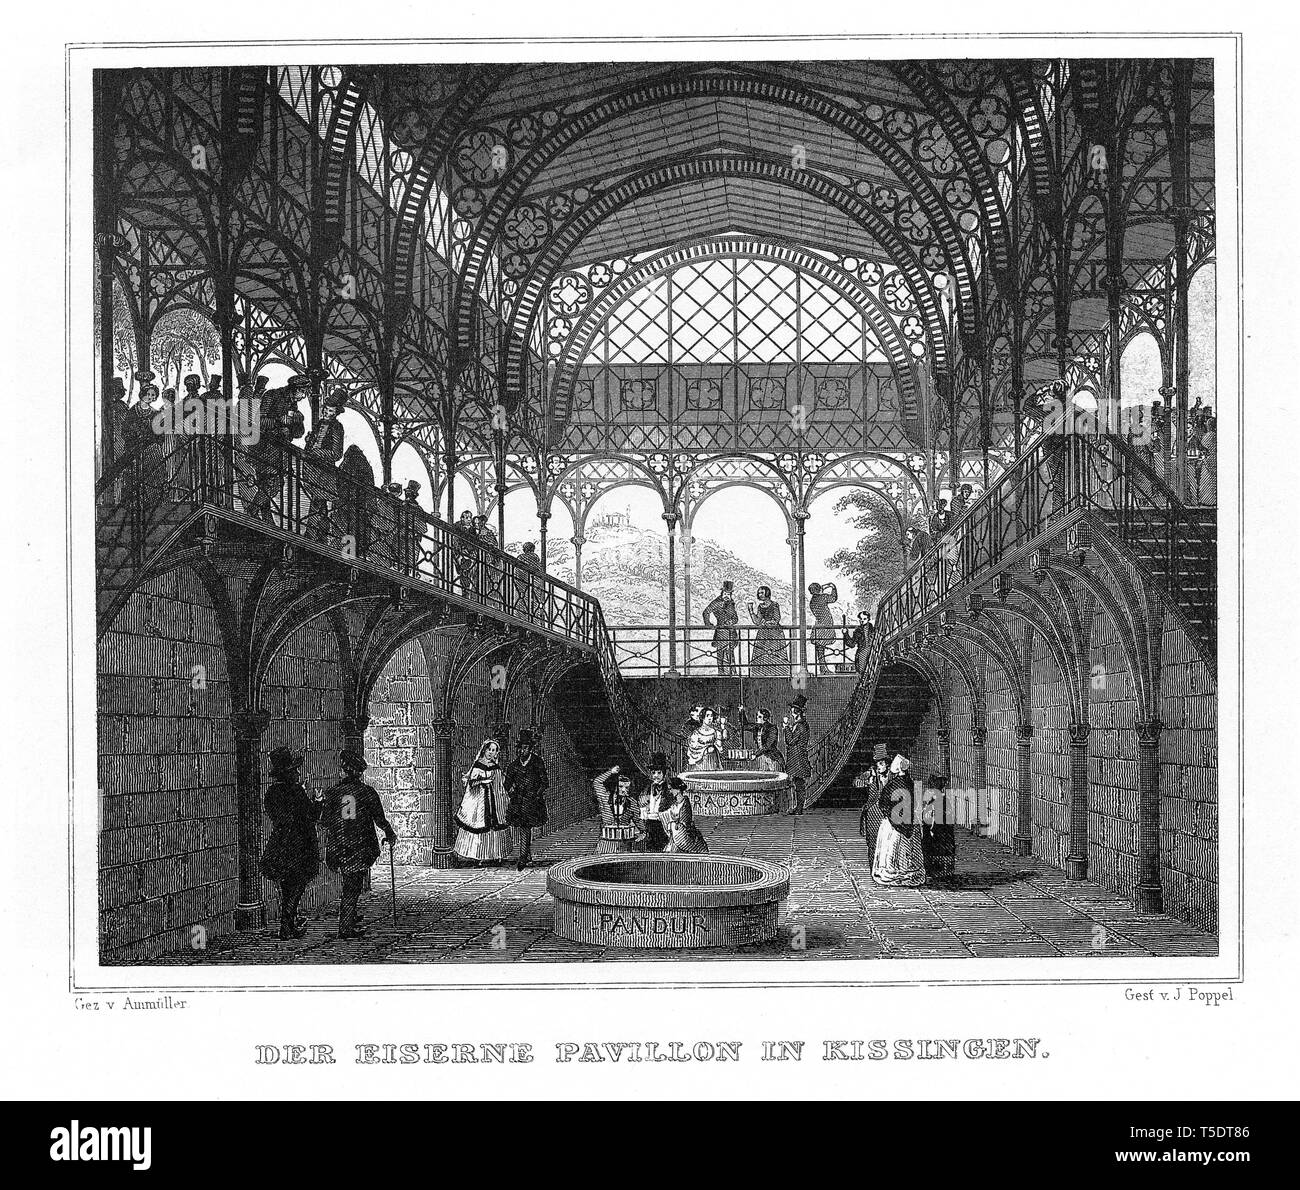 Iron fountain hall, fountain pavilion or fountain temple, Bad Kissingen, drawing by Ainmuller, steel engraving by J. Poppel, 1840-54, Kingdom of Stock Photo